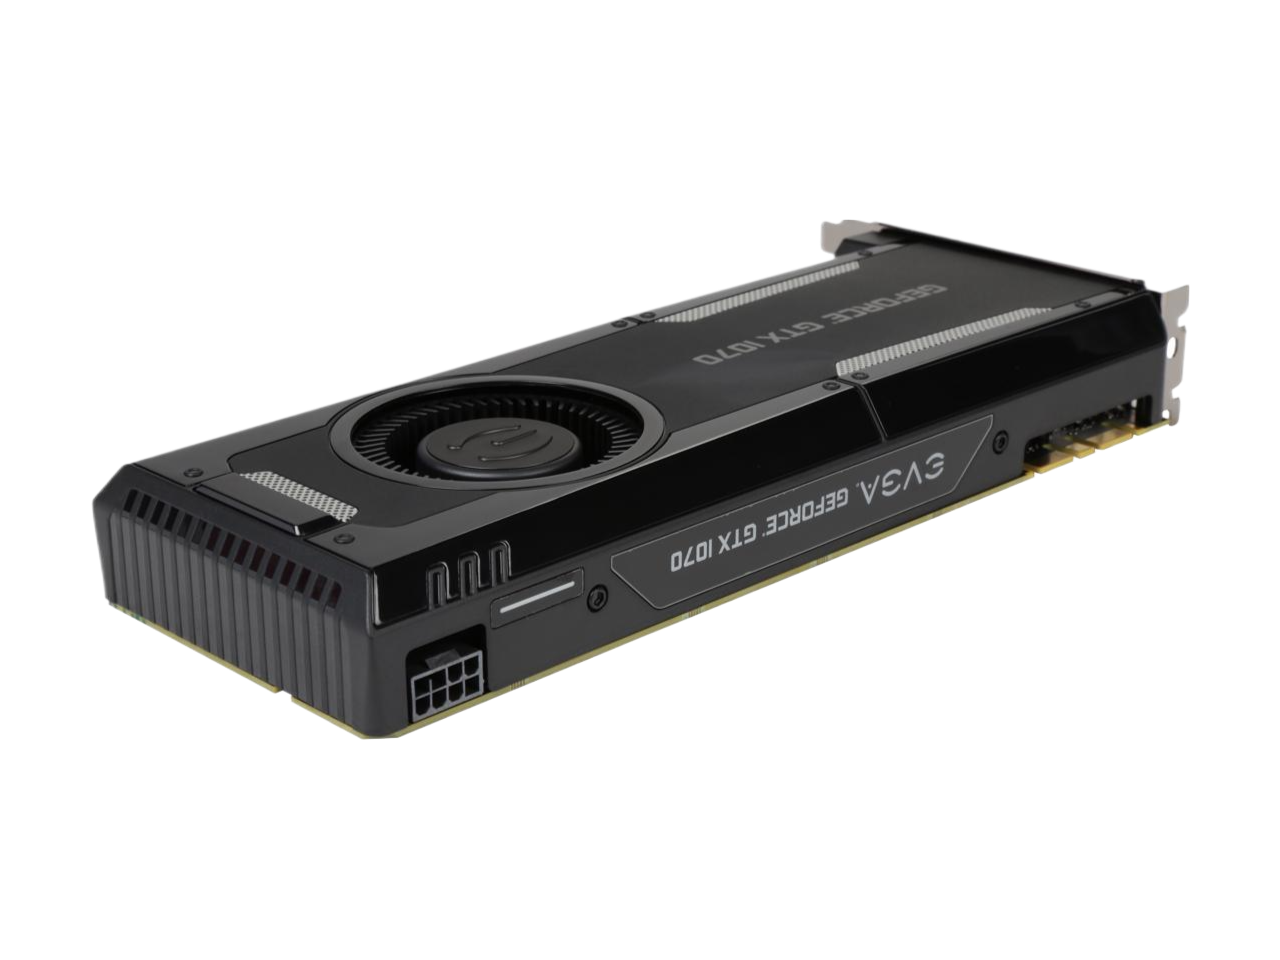 EVGA GeForce GTX 1070 GAMING 8GB GDDR5 DX12 OSD Support Graphics Cards 08G-P4-5170-KR